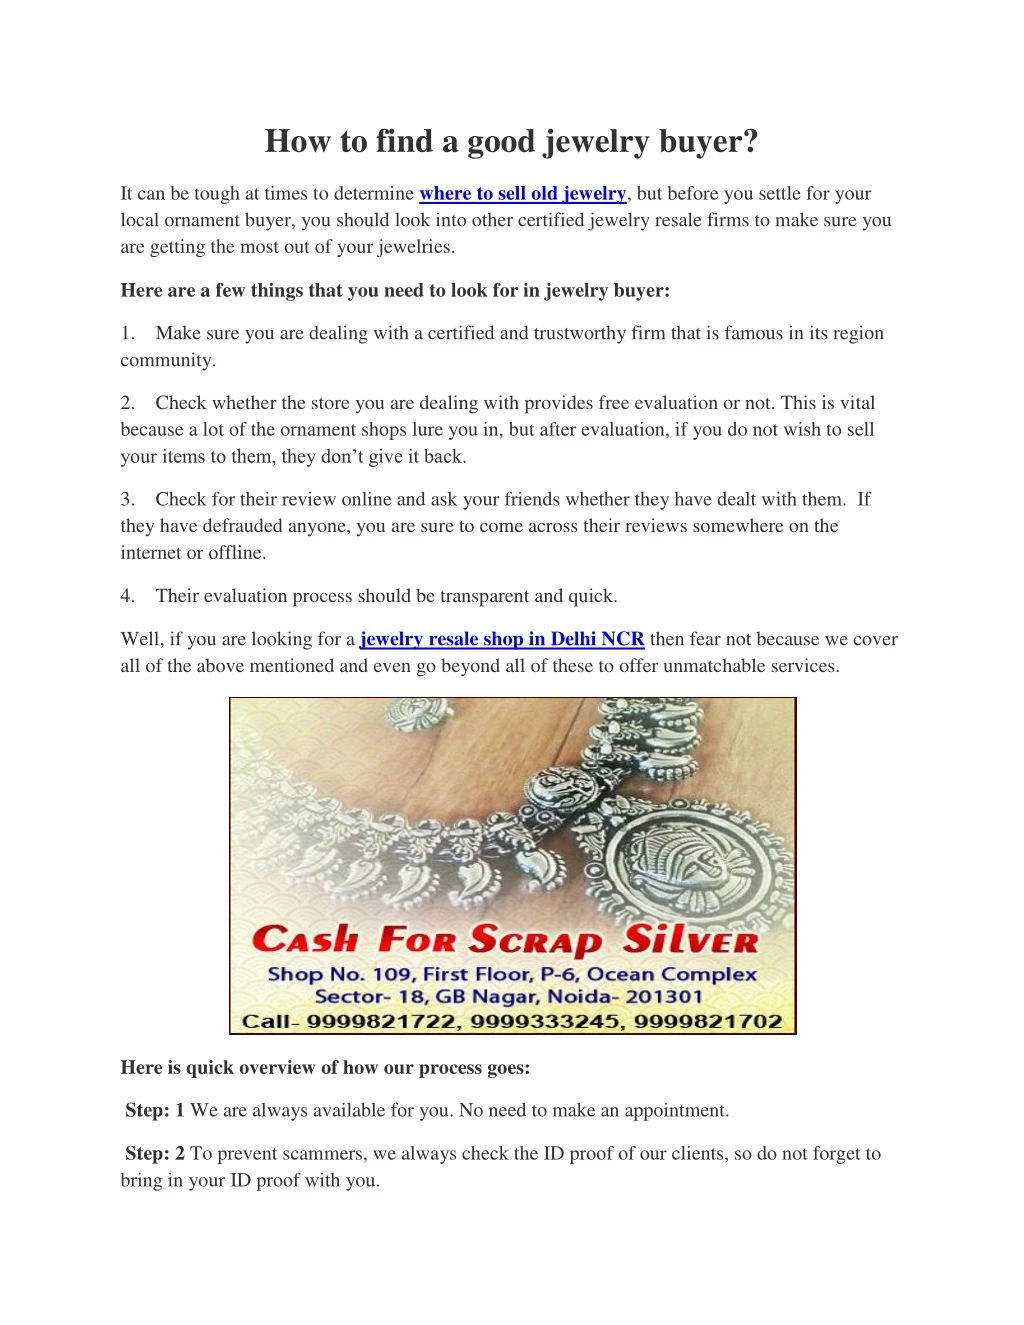 how to find a good jewelry buyer